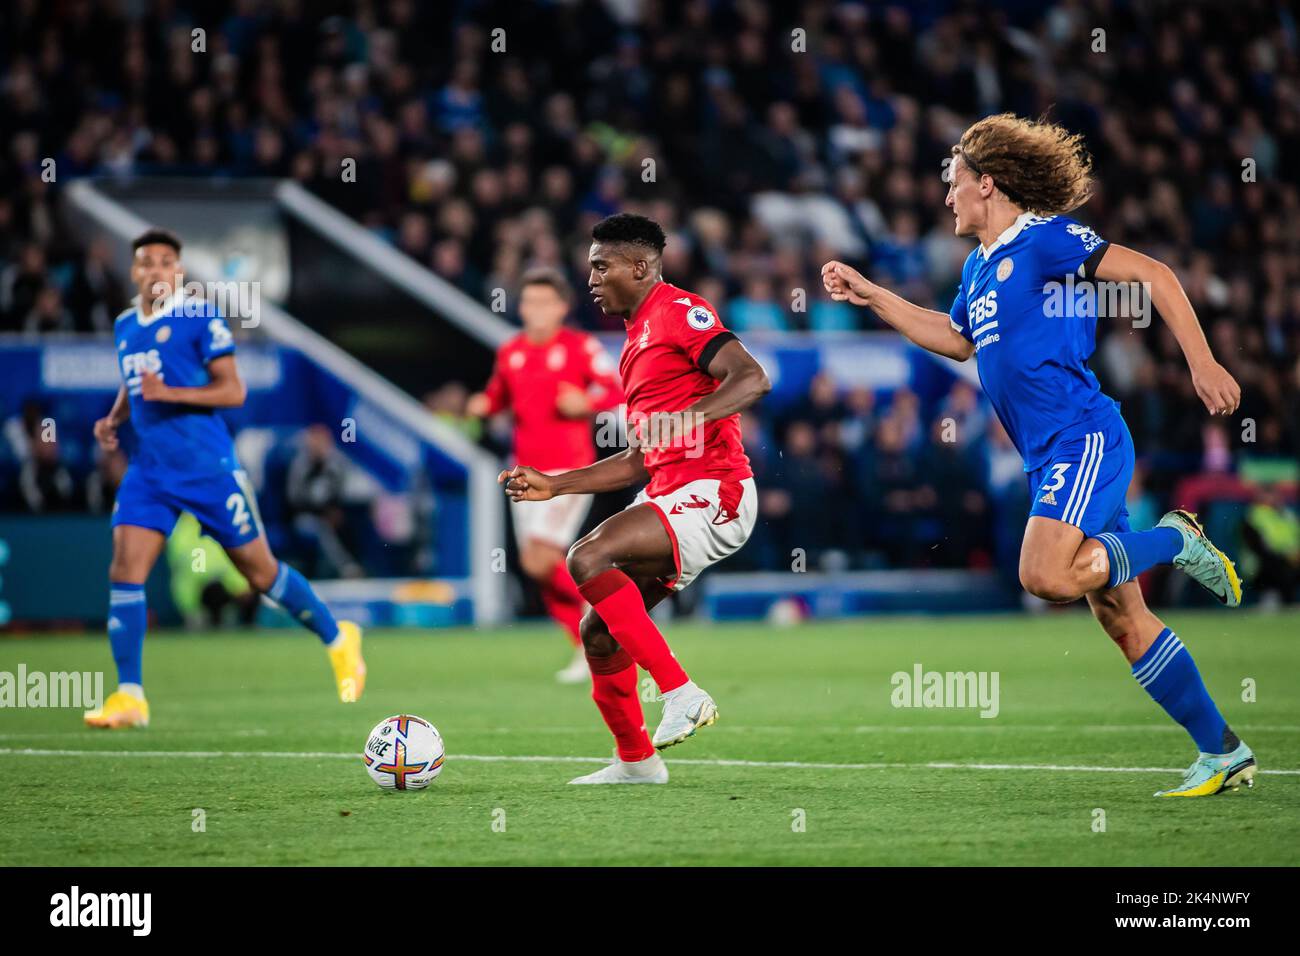 Taiwo Awoniyi #9 of Nottingham Forest races through on goal during the Premier League match Leicester City vs Nottingham Forest at King Power Stadium, Leicester, United Kingdom, 3rd October 2022  (Photo by Ritchie Sumpter/News Images) Stock Photo